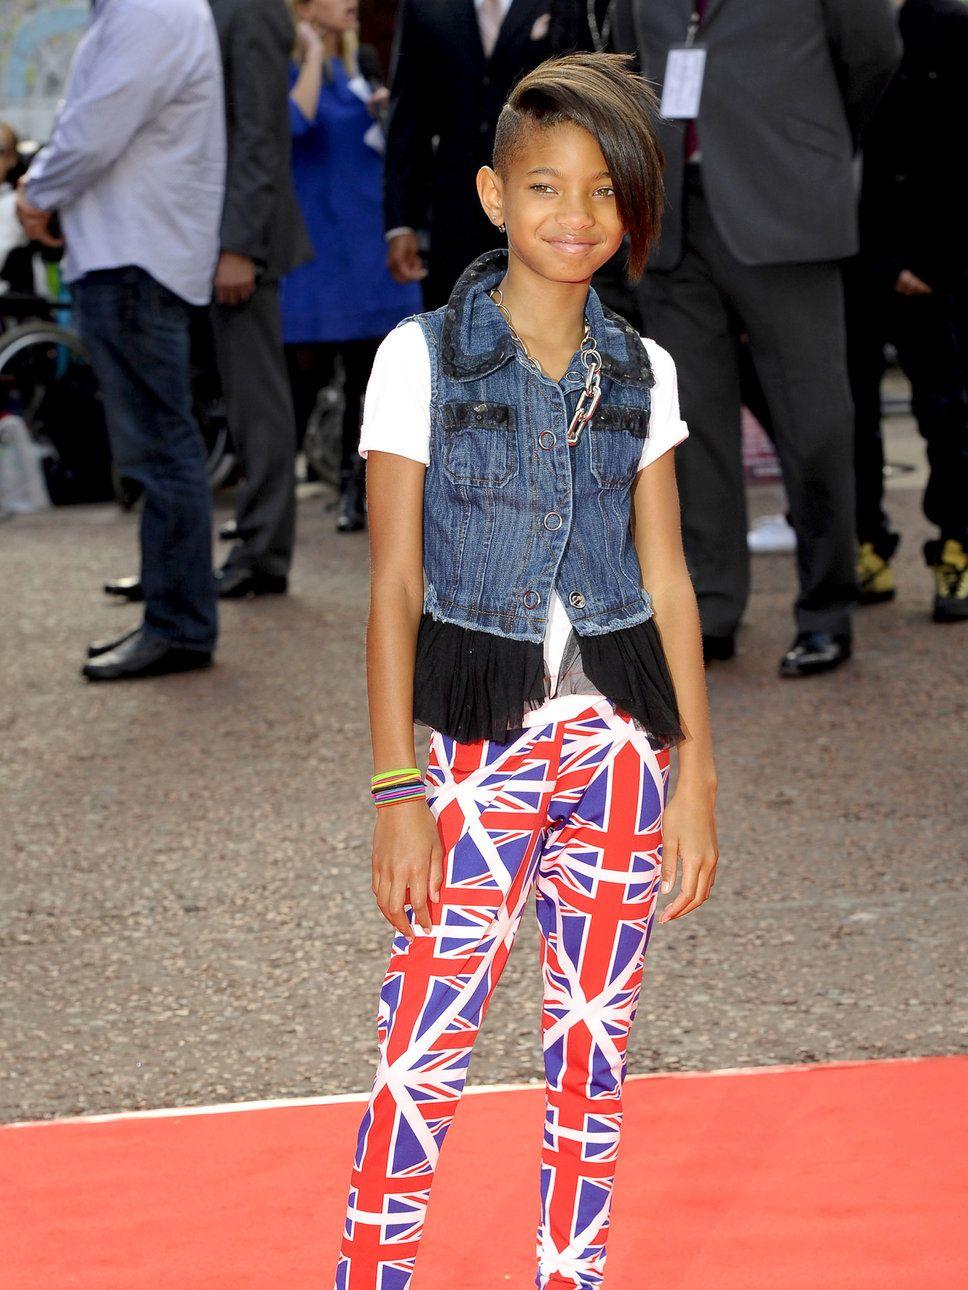 Willow Smith and Jaden Smith bio. Rising stars Willow and Jaden